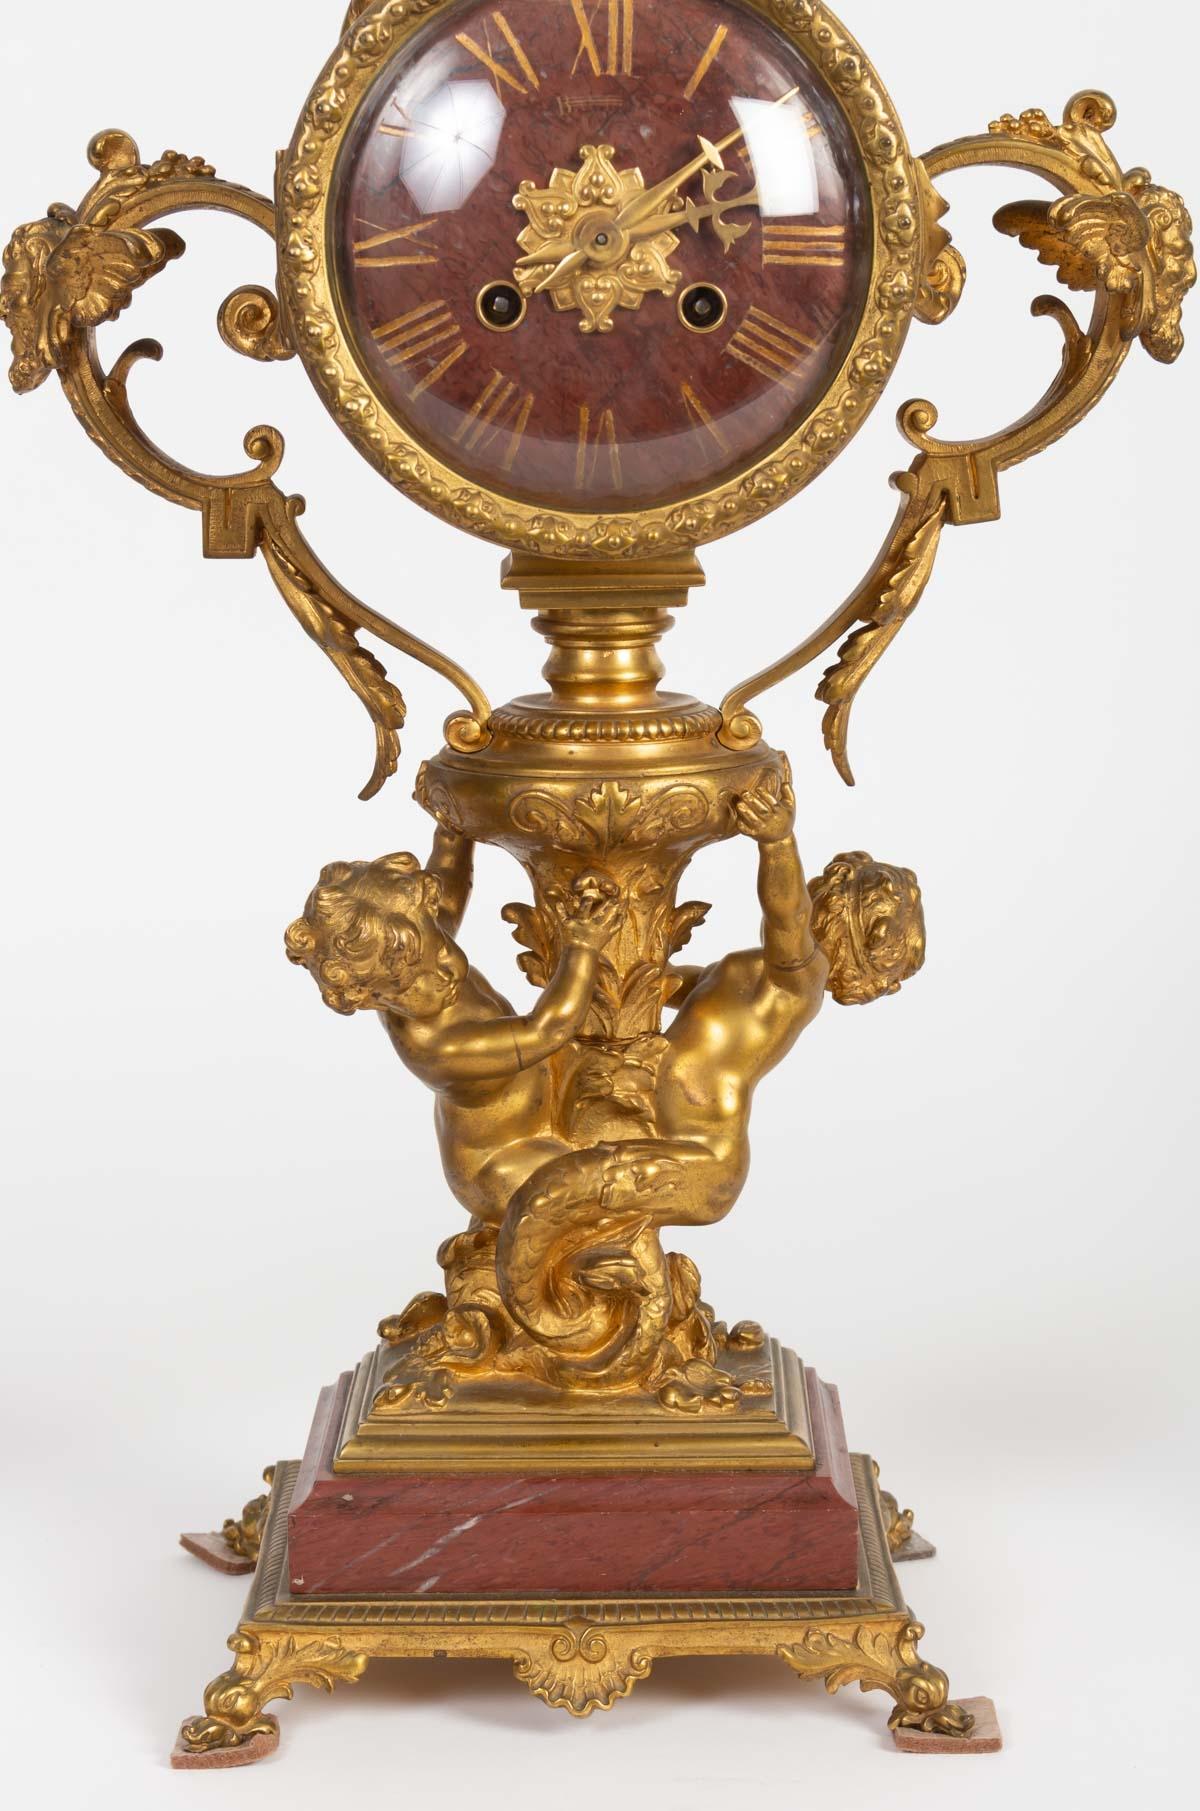 19th century Napoleon III gilt bronze trim
The gilding is original.
This mantel trim is remarkable for the profusion of detail and the variety of its ornamental bronzes.
Dimensions of the clock(cm): height 52, length 45, width 17
Dimensions of